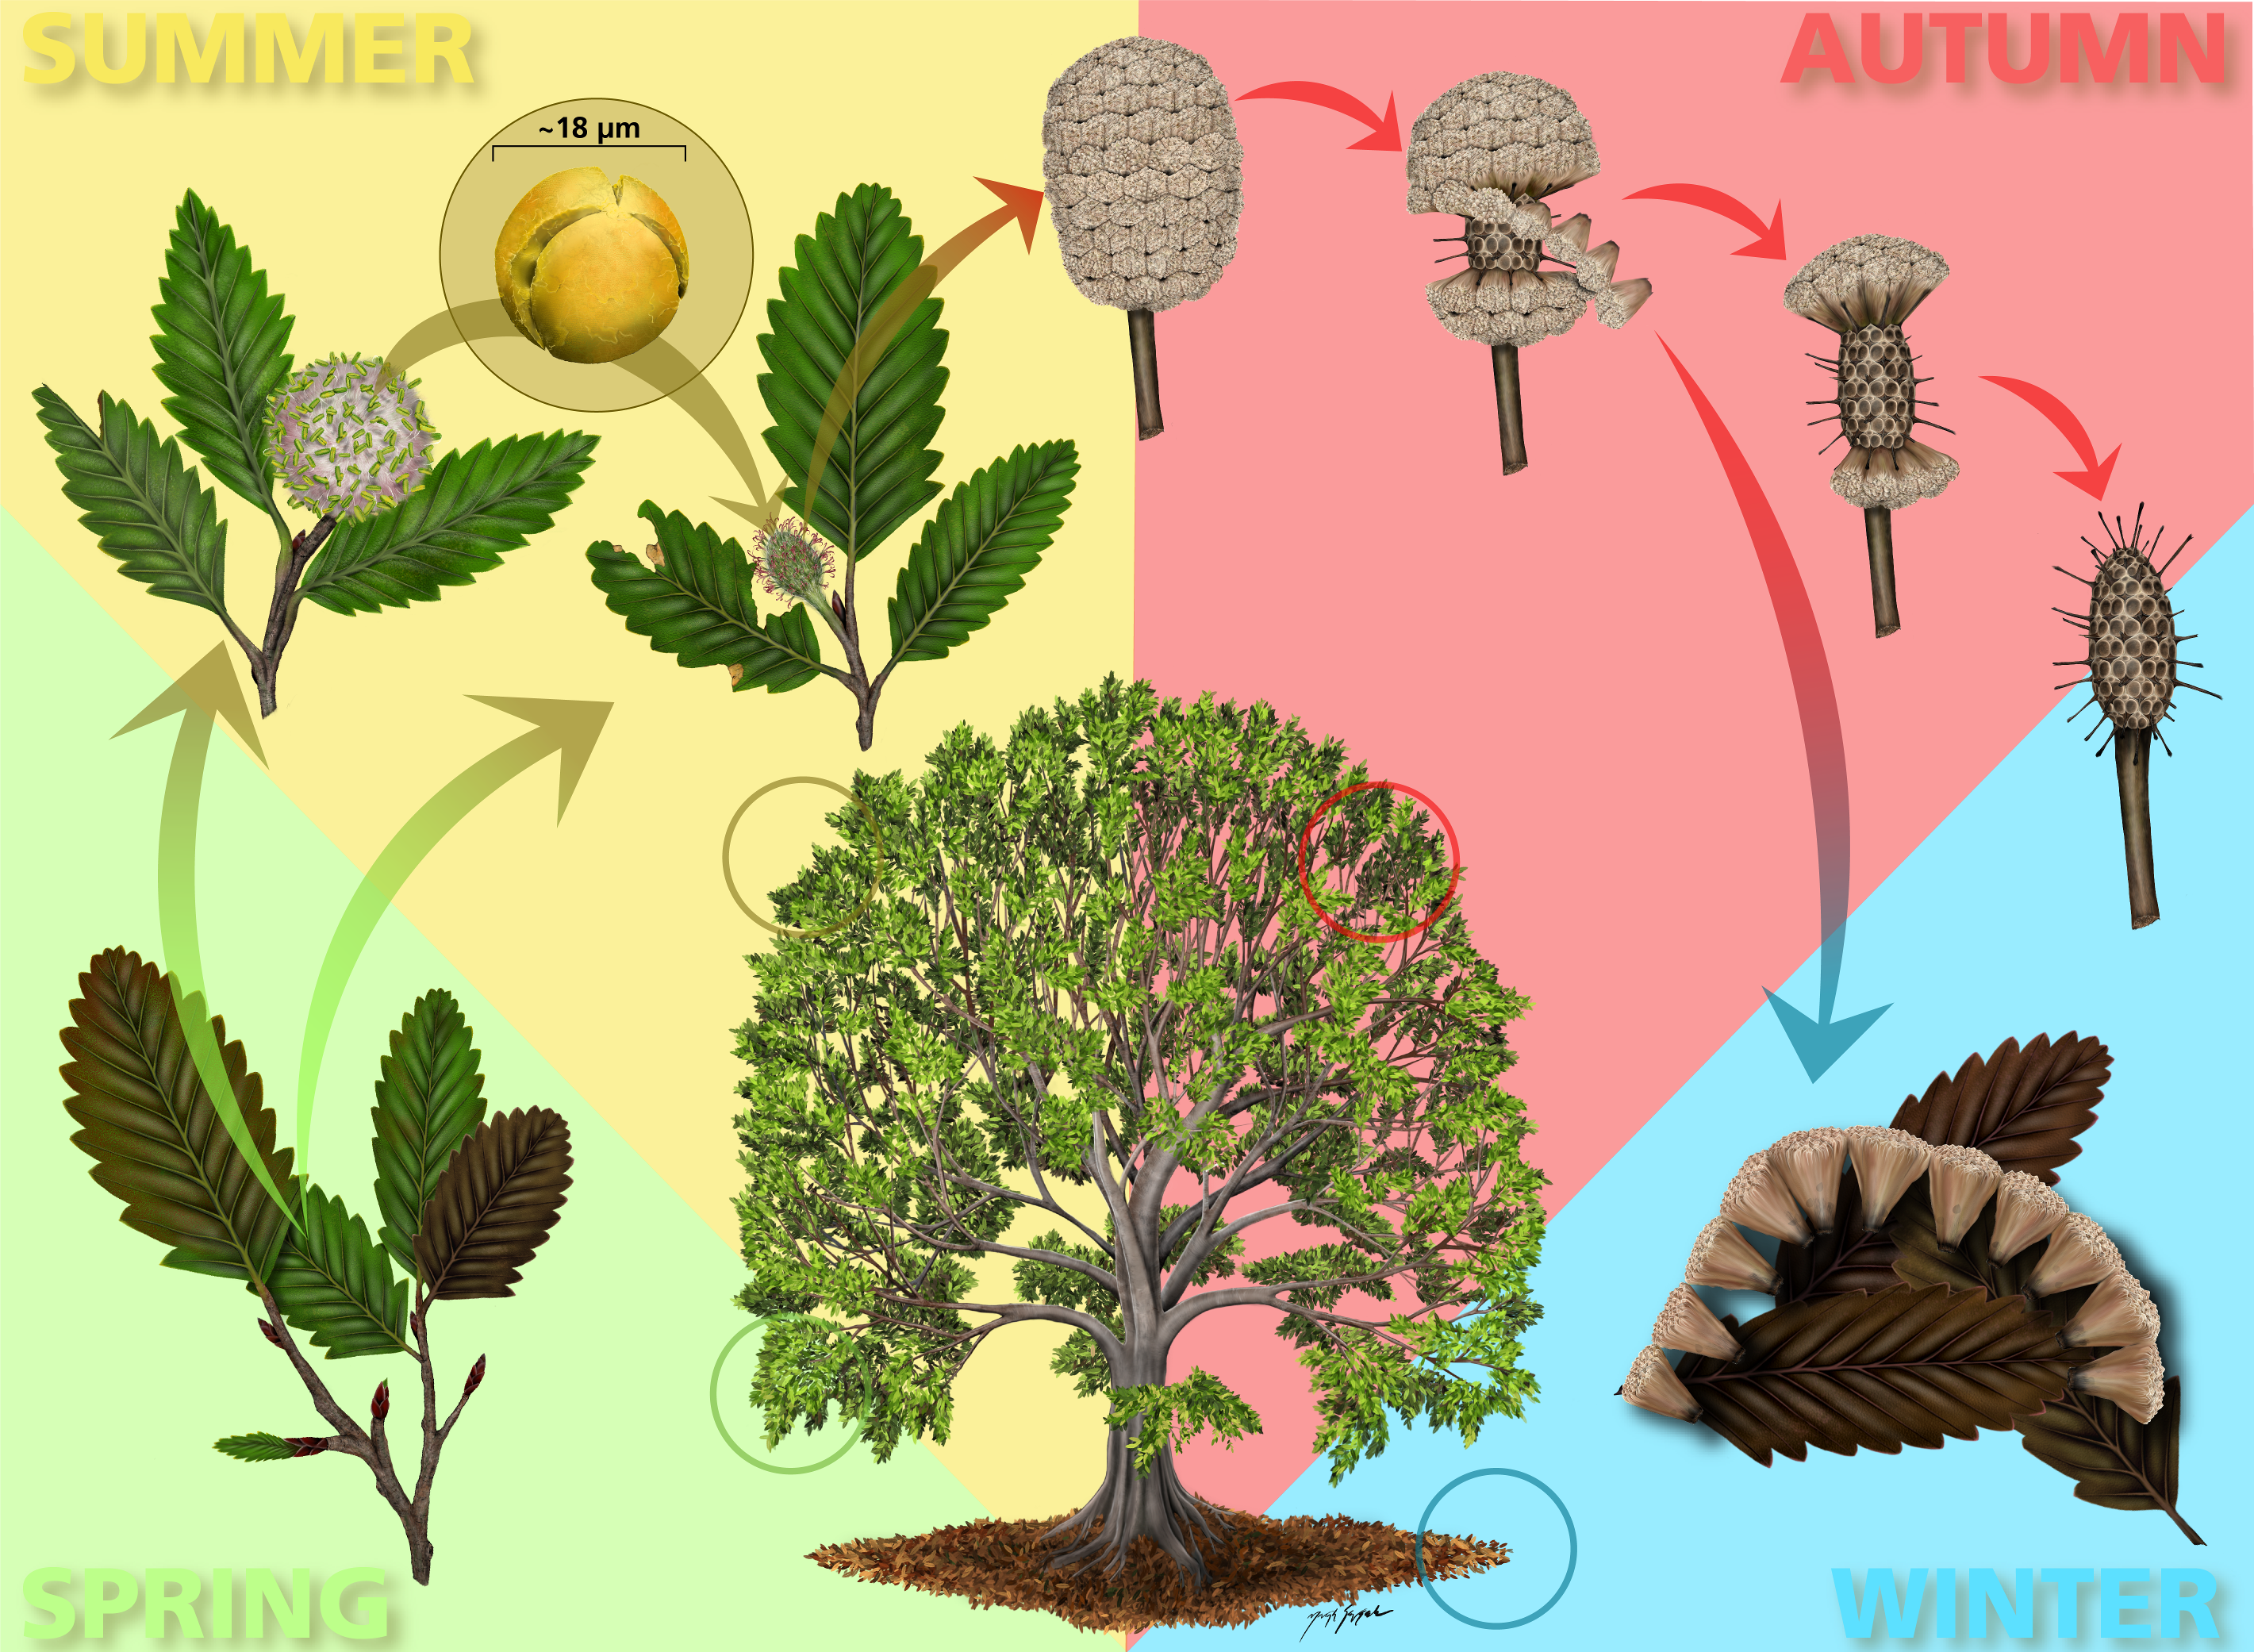 Schematic showing the seasonal cycle of a Fagopsis tree.  Budding green leaves in spring, pollinating flowers in summer, the fall shows mature fruit with triangle shaped wedges, and then dead leaves and triangle wedges with seeds on ground in fall.